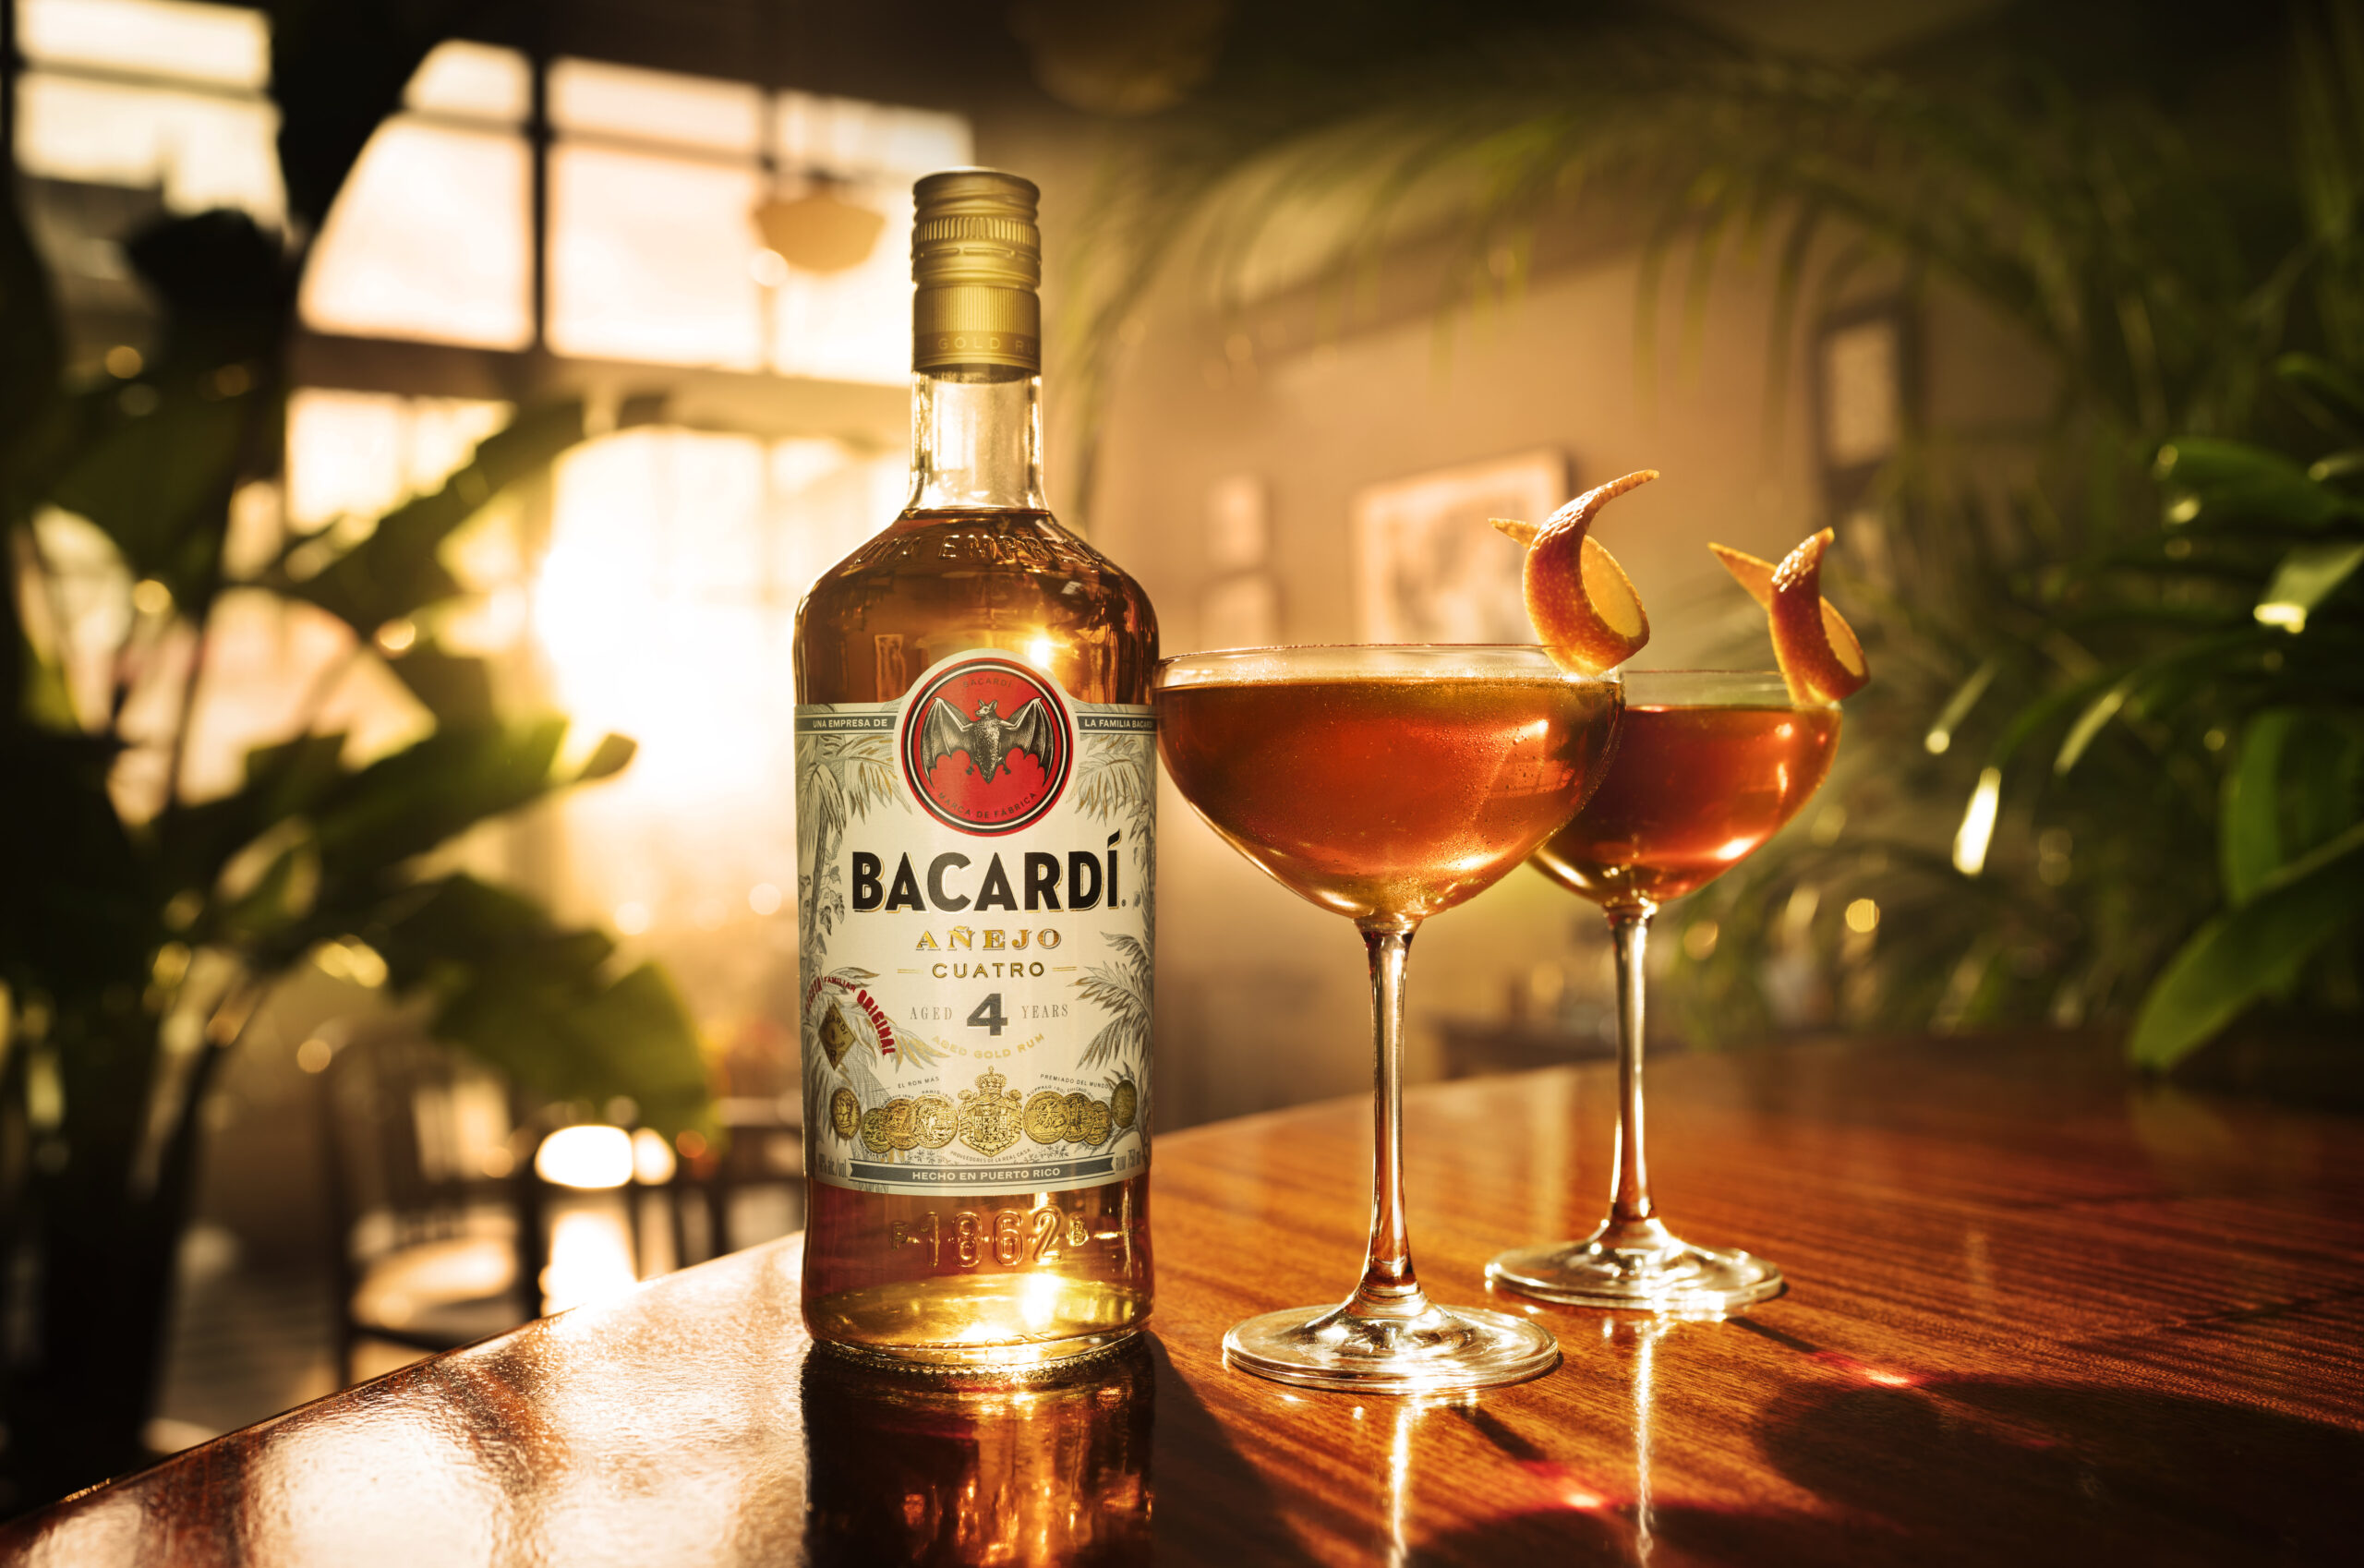 Bacardi launches cocktail campaign in Singapore - The Drinks Business